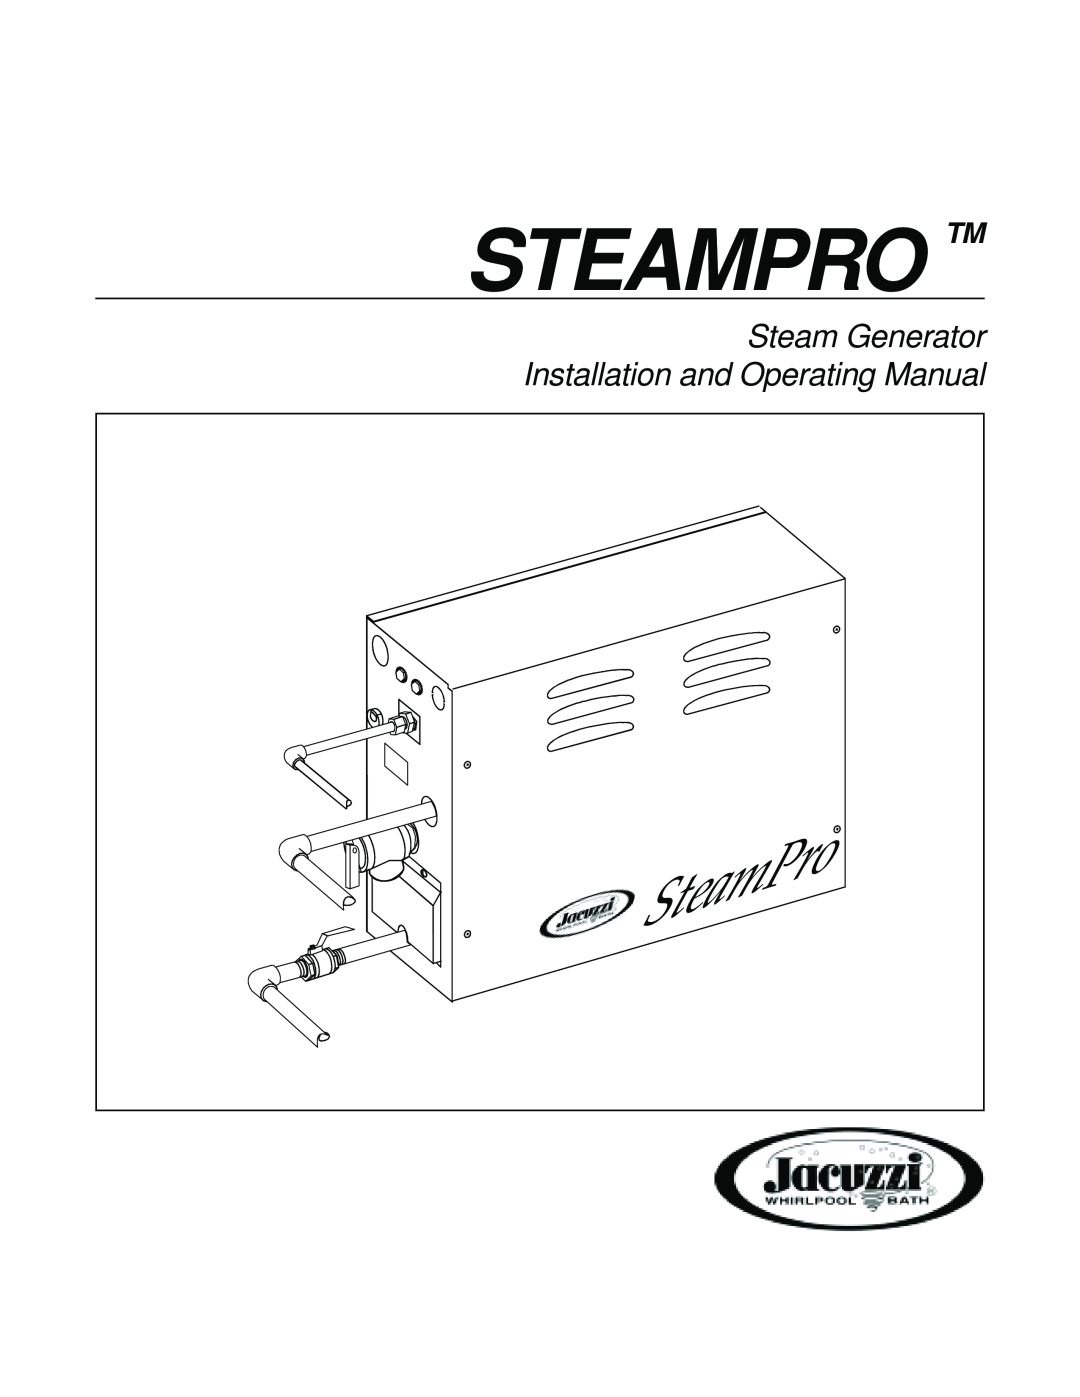 Jacuzzi SteamPro manual Steampro Tm, Steam Generator Installation and Operating Manual 